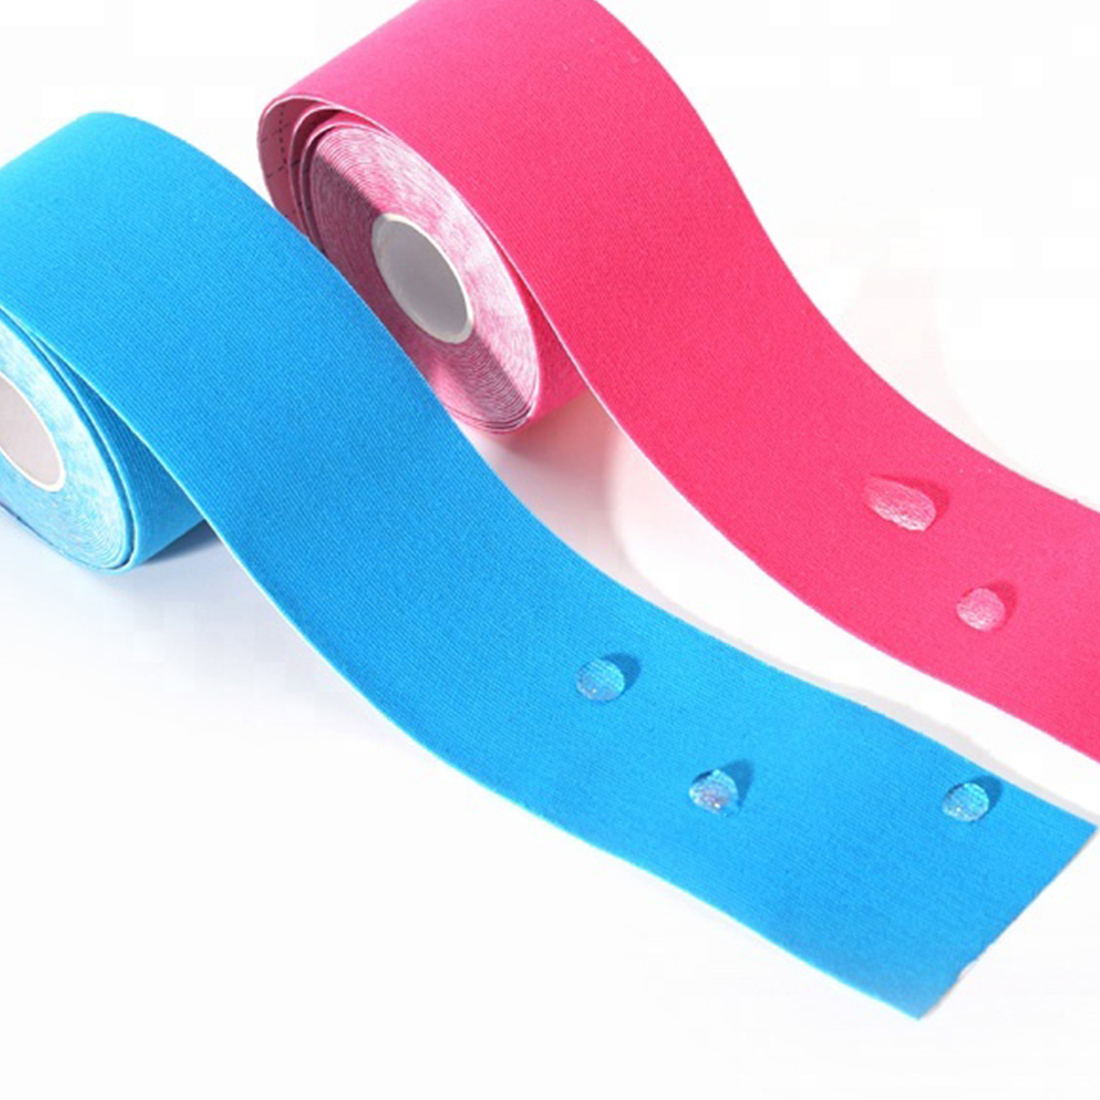 /product/kinesiology-tape-27.html